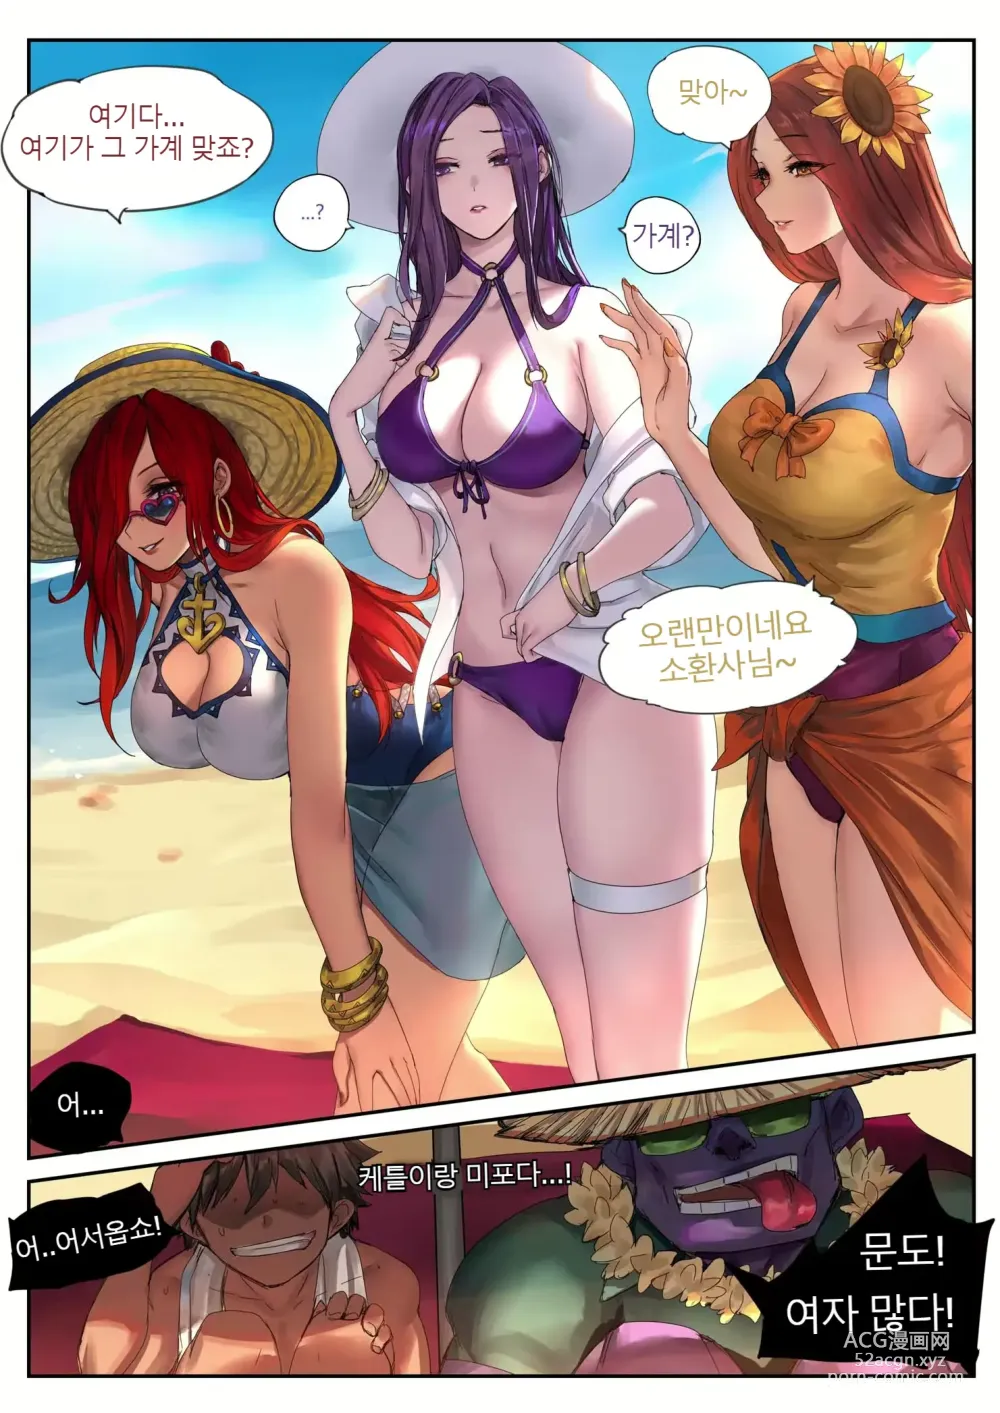 Page 2 of doujinshi Pool Party - Summer in summoners rift 2